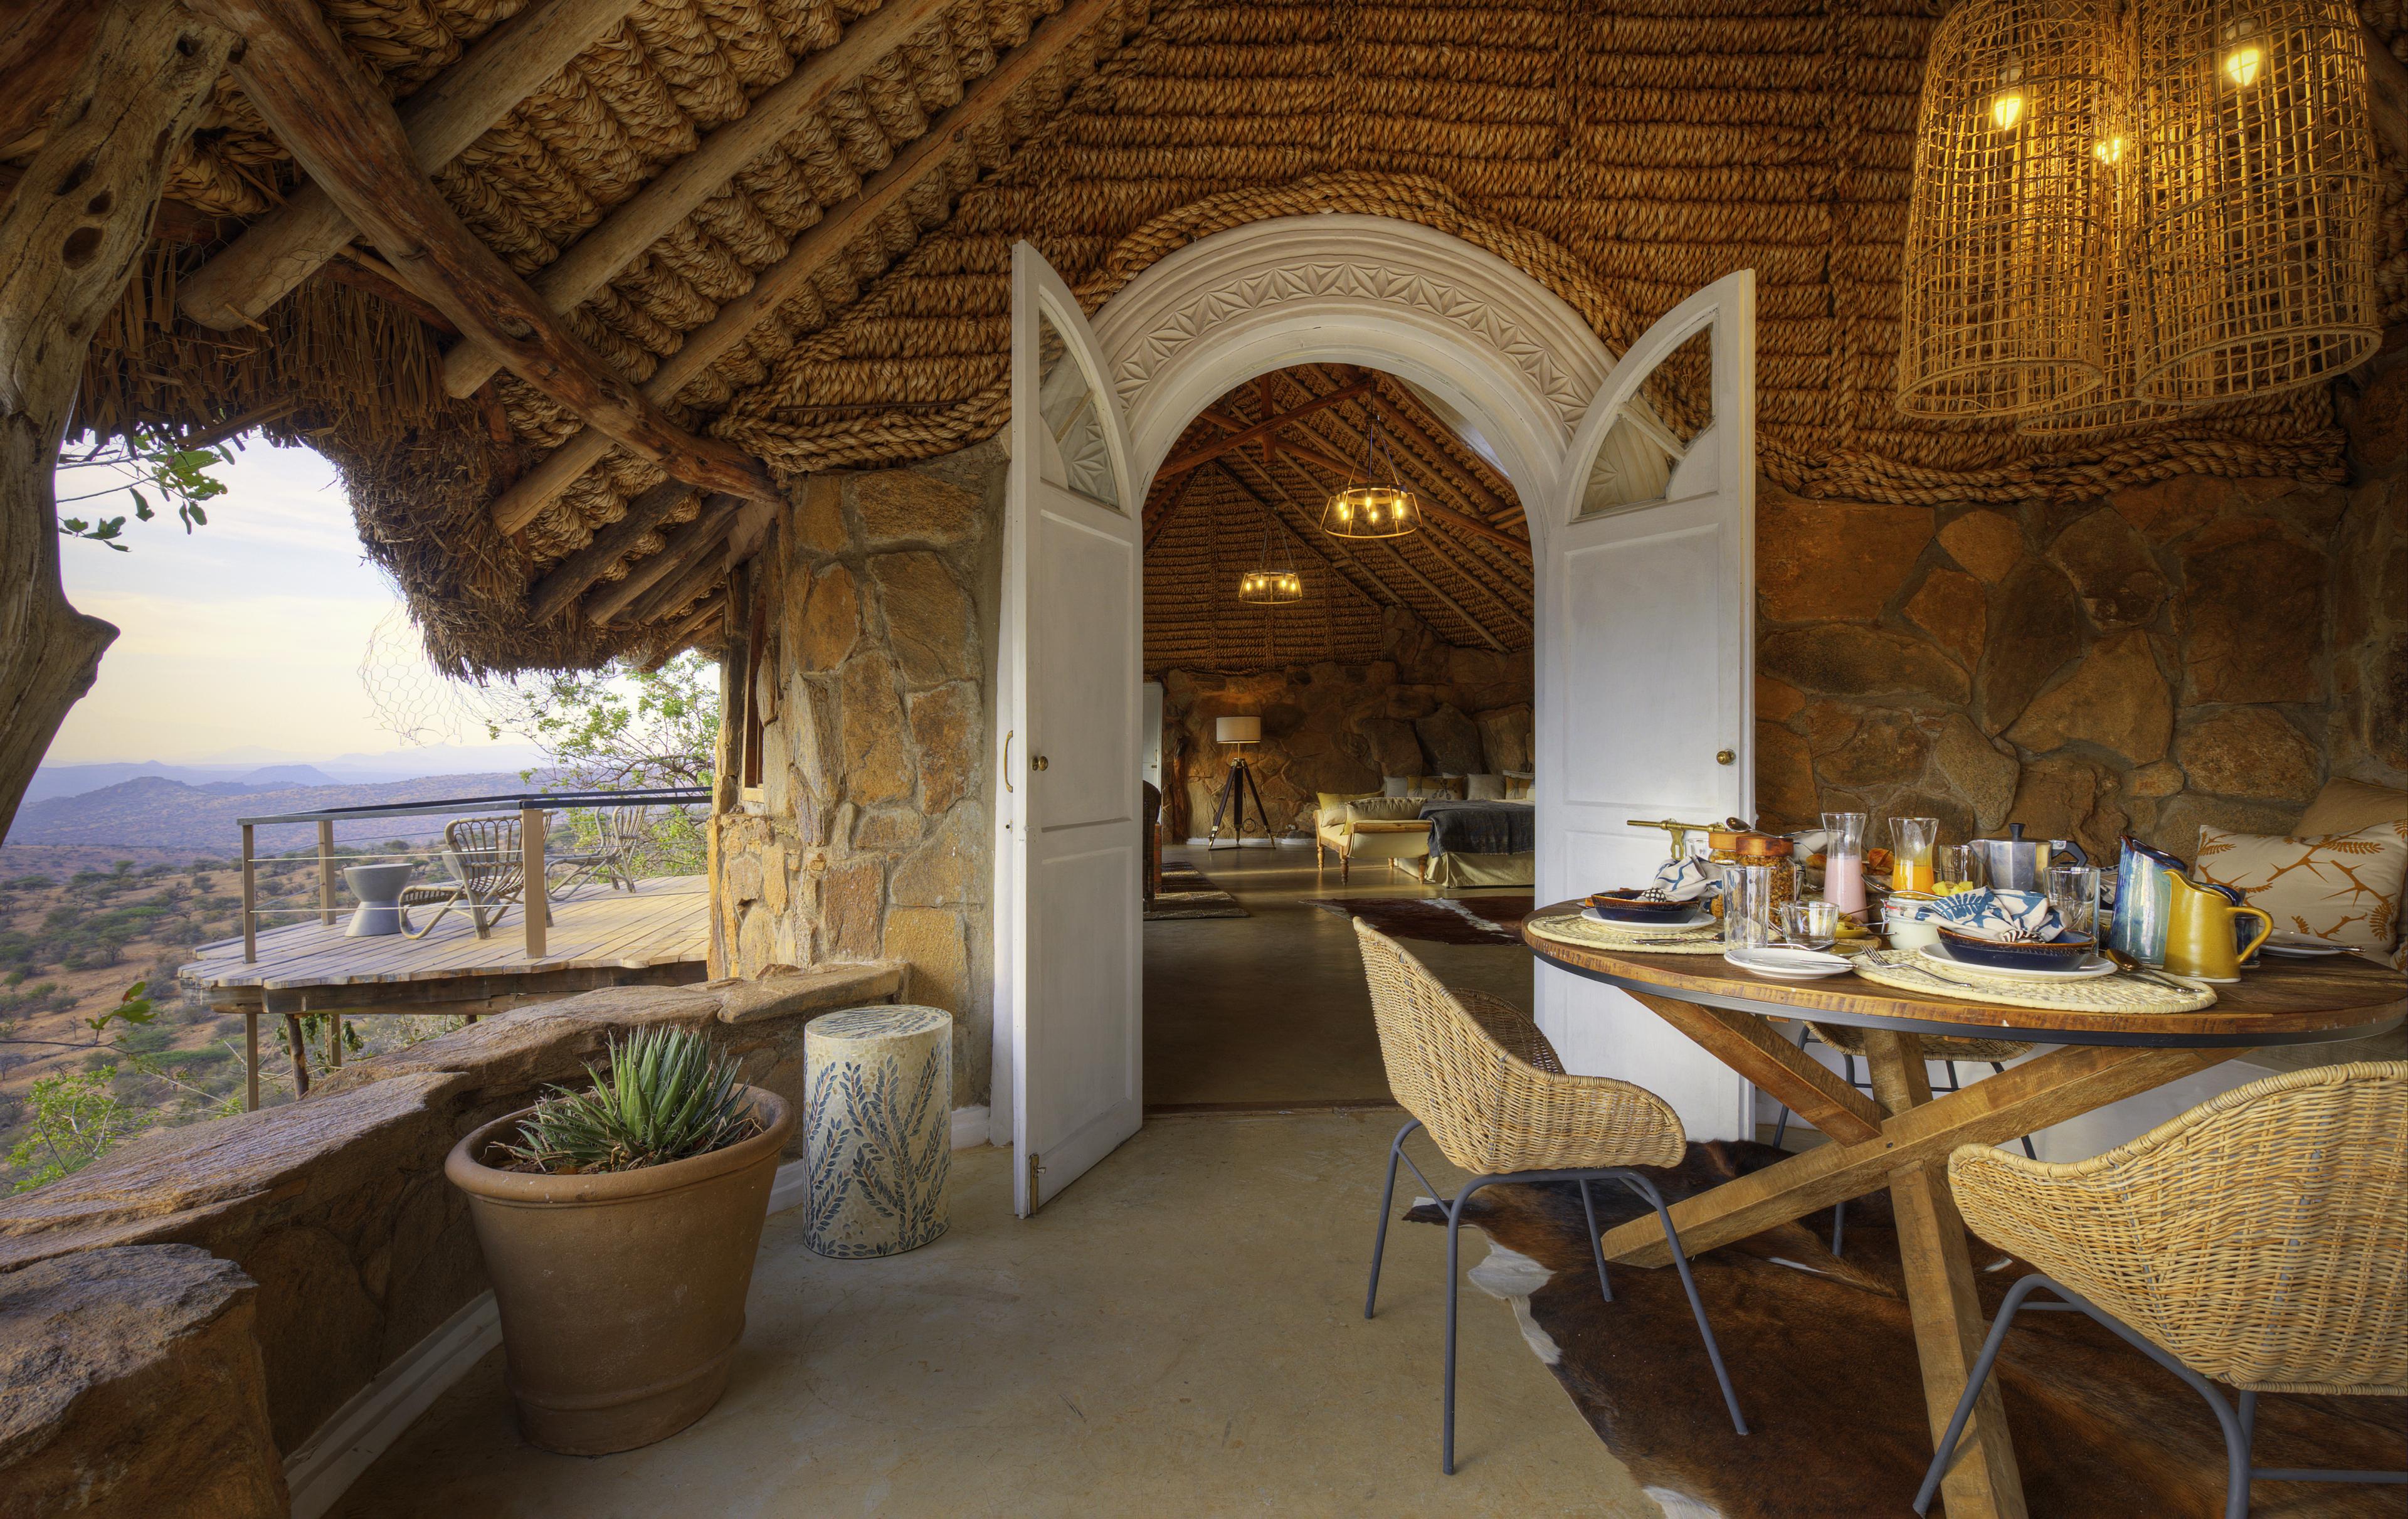 safari lodge terrace with white doors and open air view out to rolling landscape